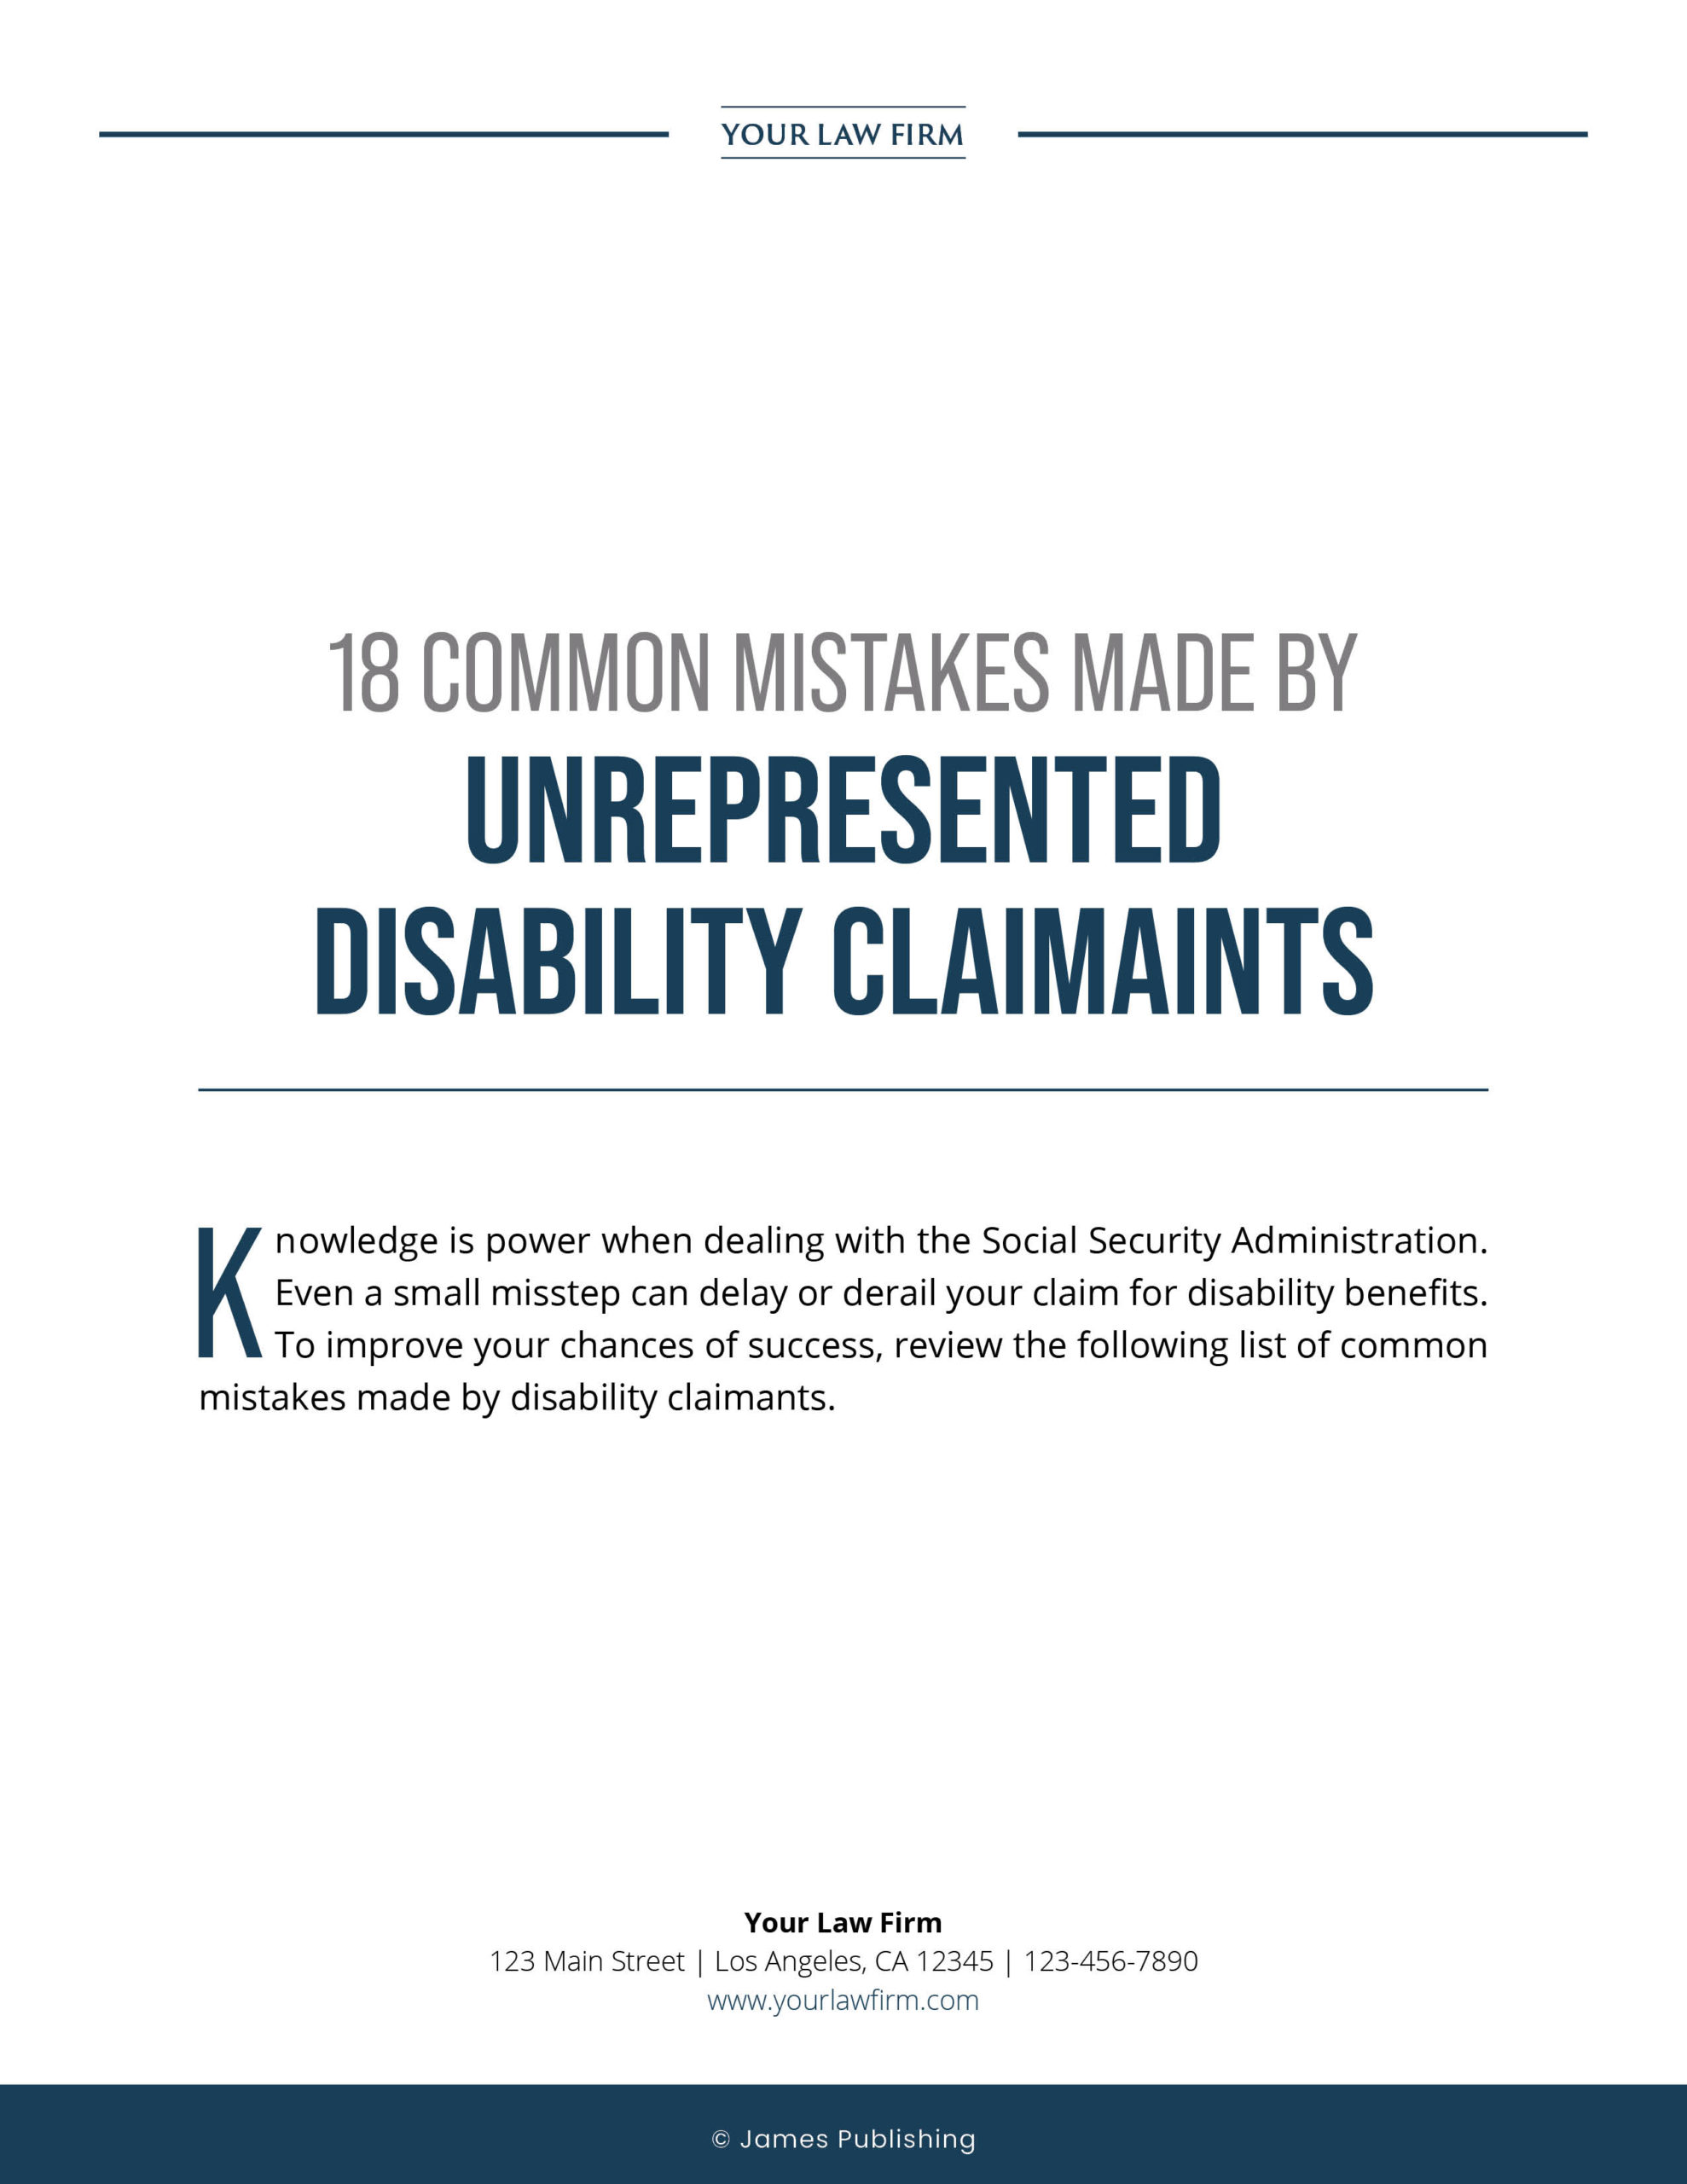 SSD-03 18 Common Mistakes Made By Unrepresented Social Security Disability Claimants